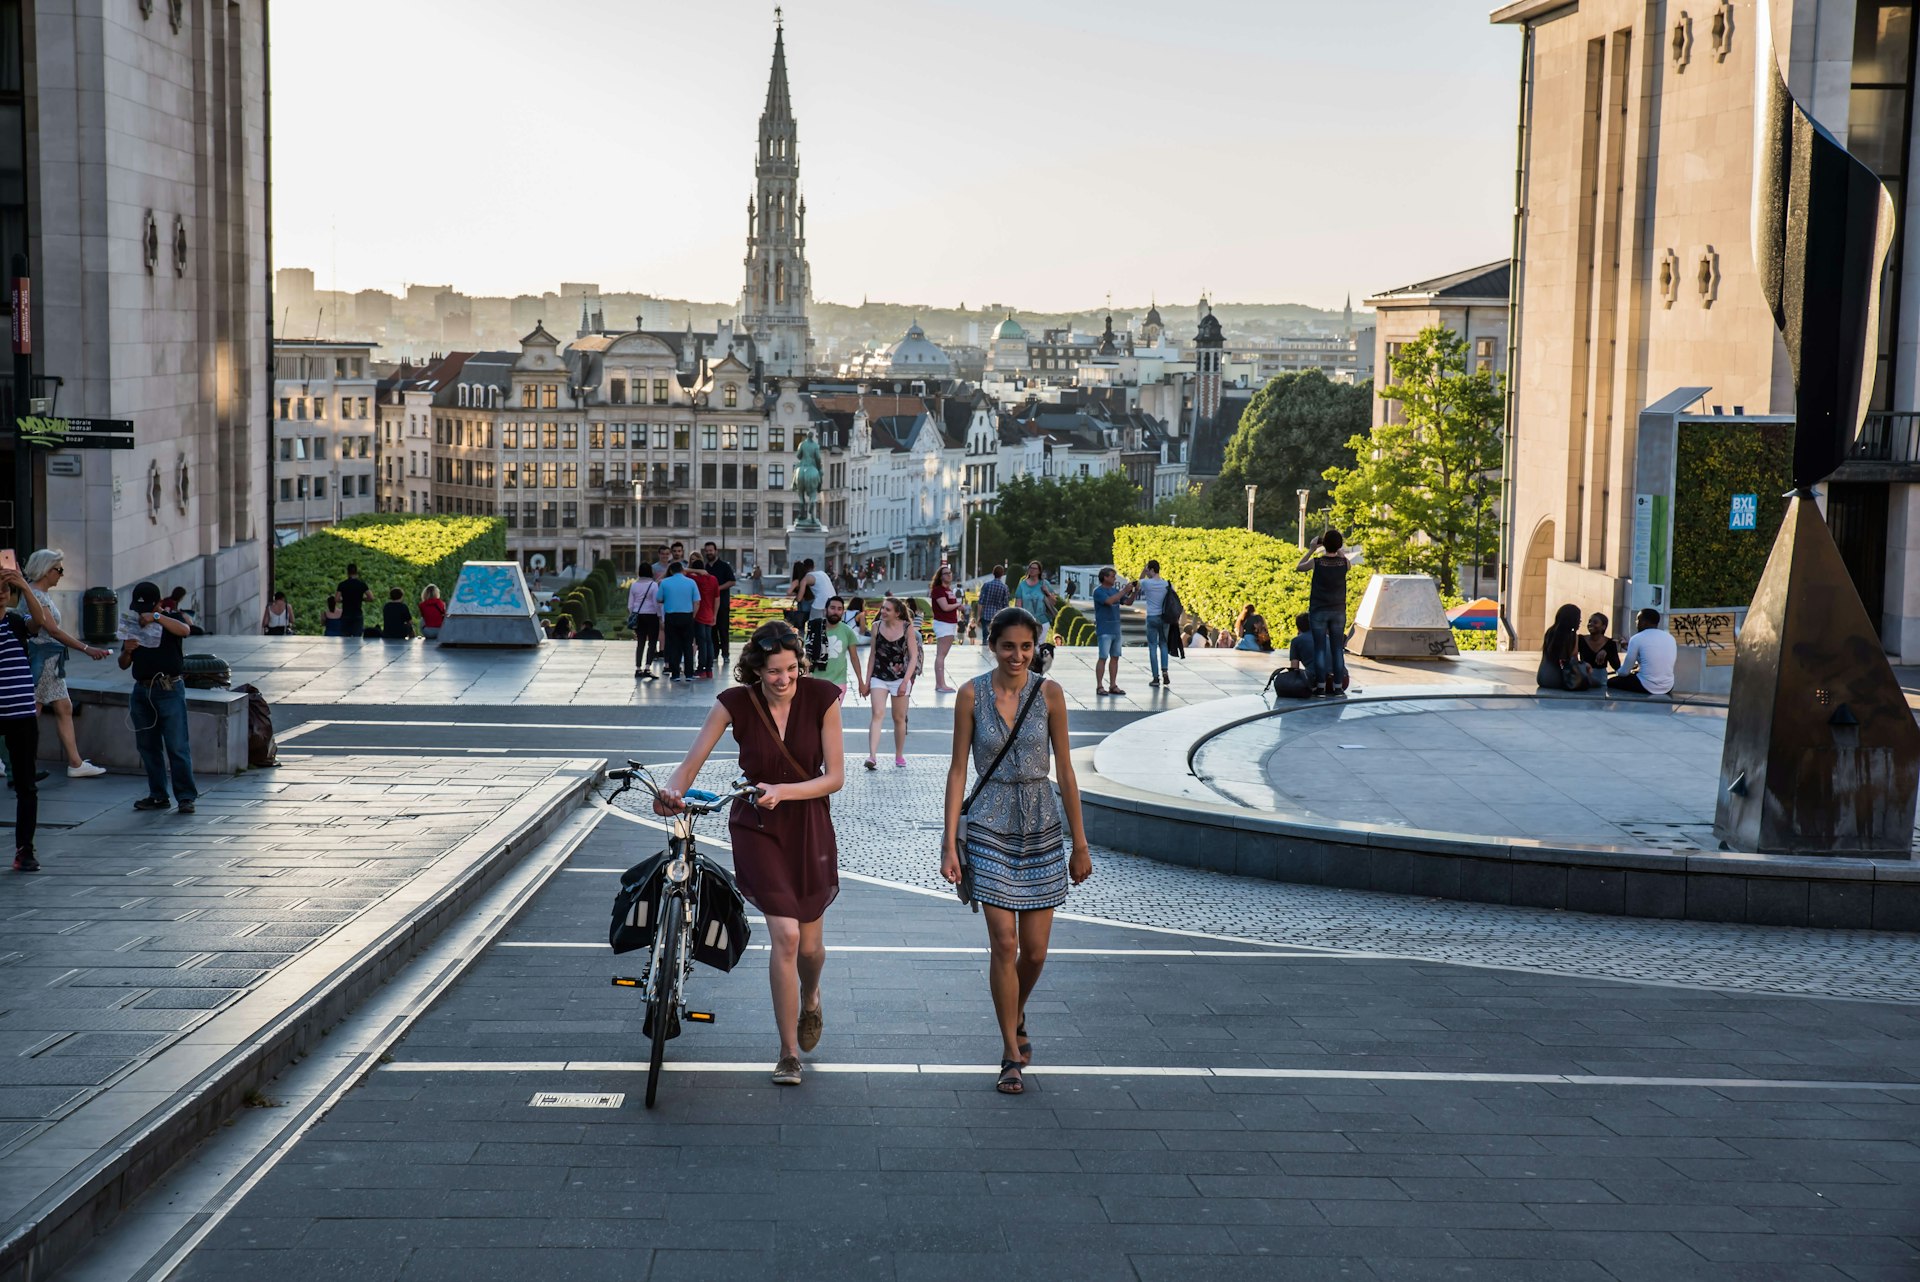 Two young women in summer dresses strolling over sunny streets at Mont des Arts, one pushing a bicycle